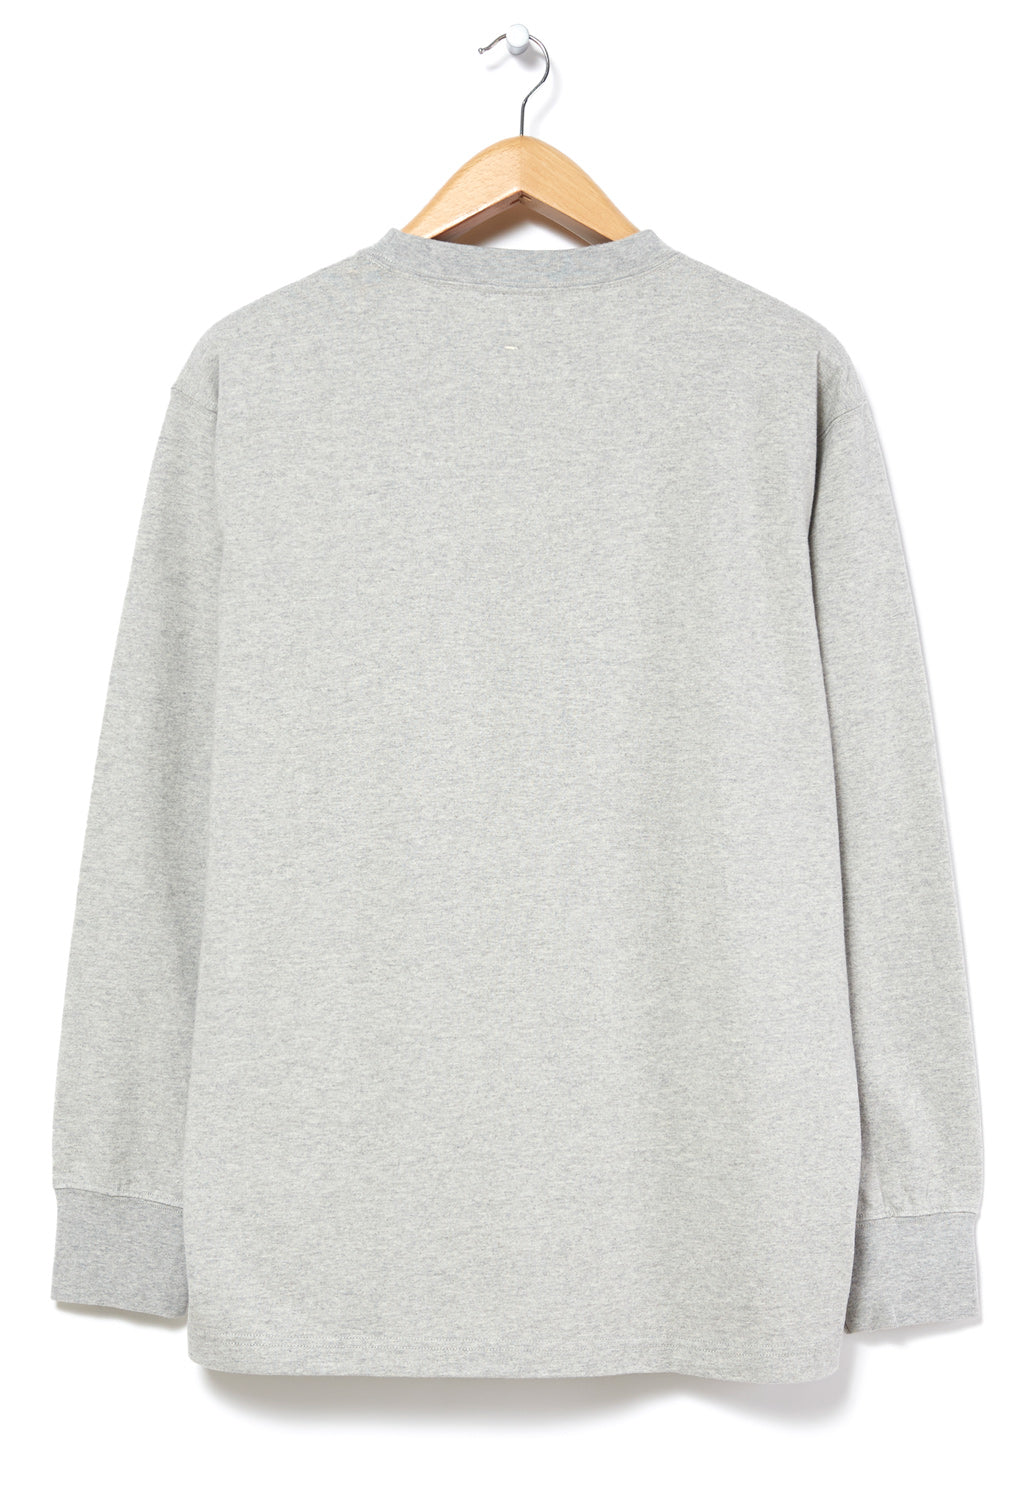 Snow Peak Recycled Cotton Heavy Long Sleeved T-Shirt - Mid Grey